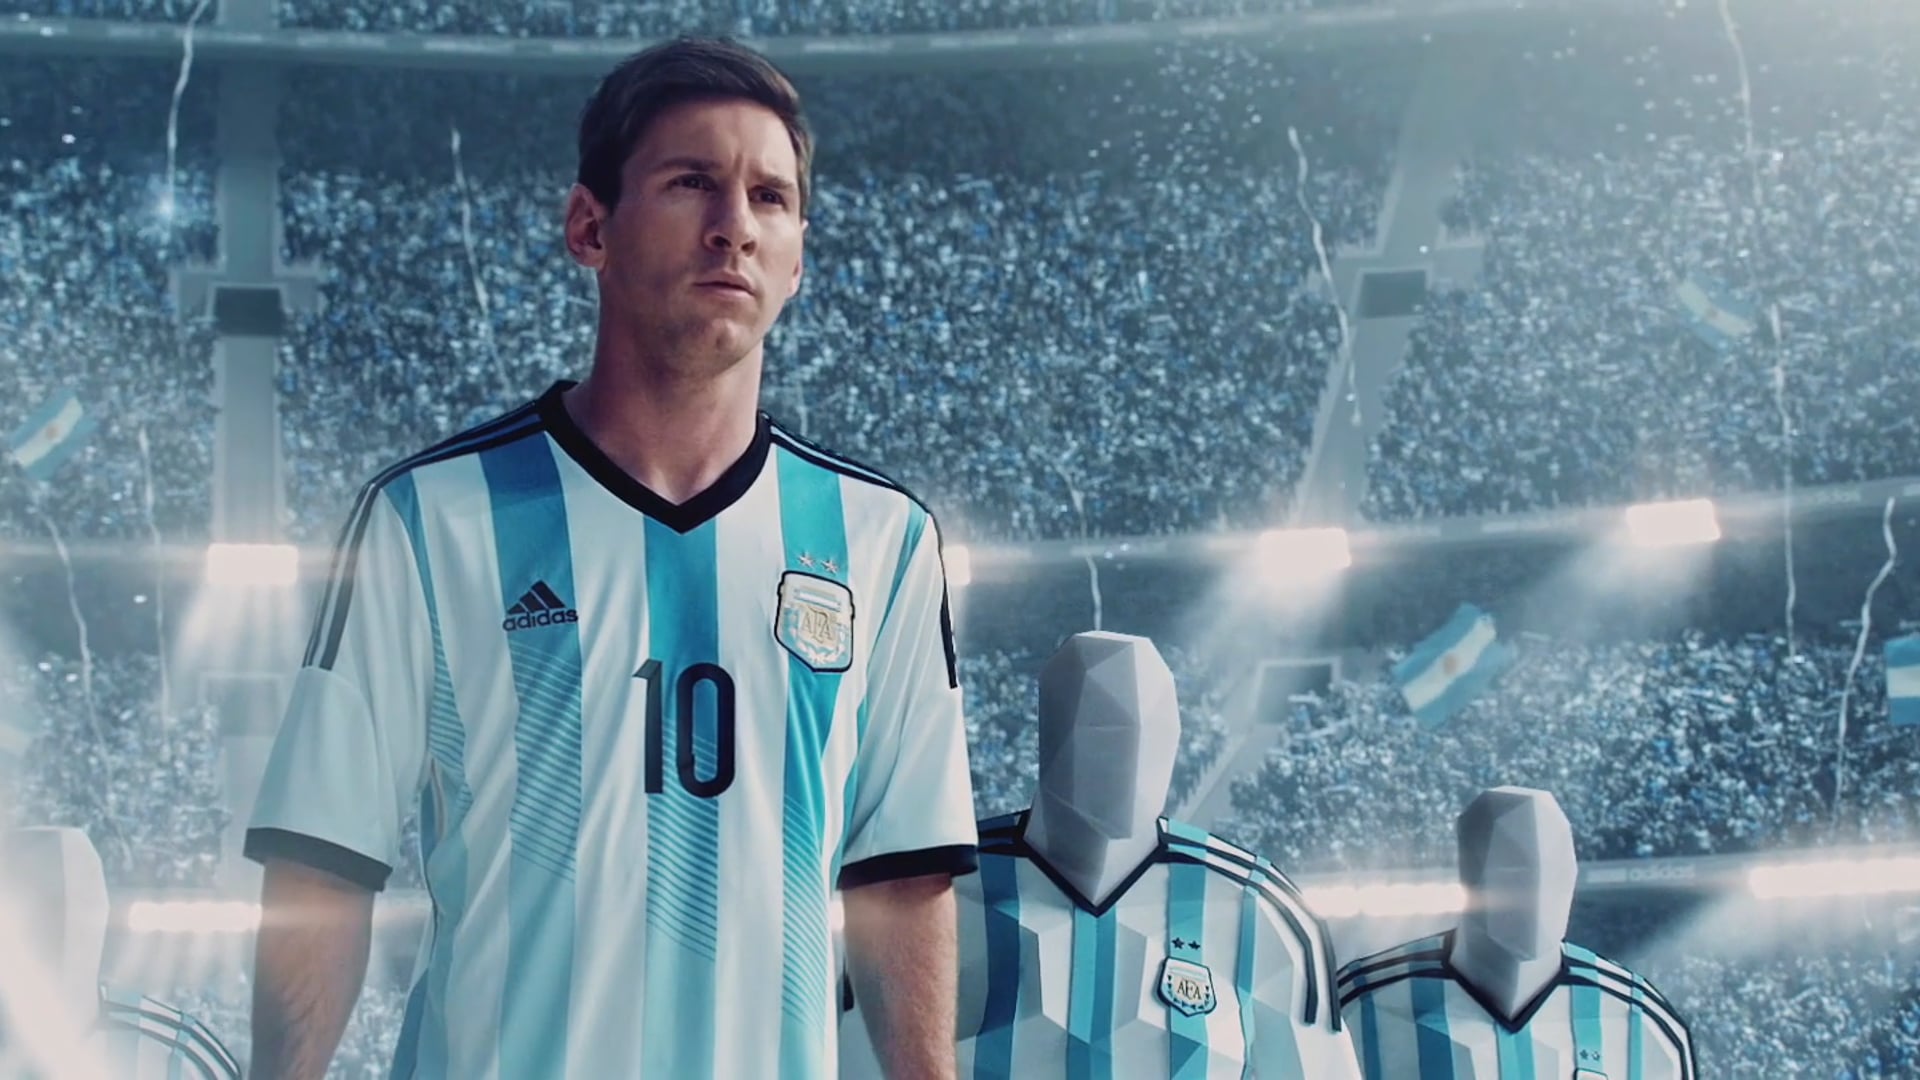 Leo Messi on the road to the 2014 FIFA World Cup™ - Fast or Fail